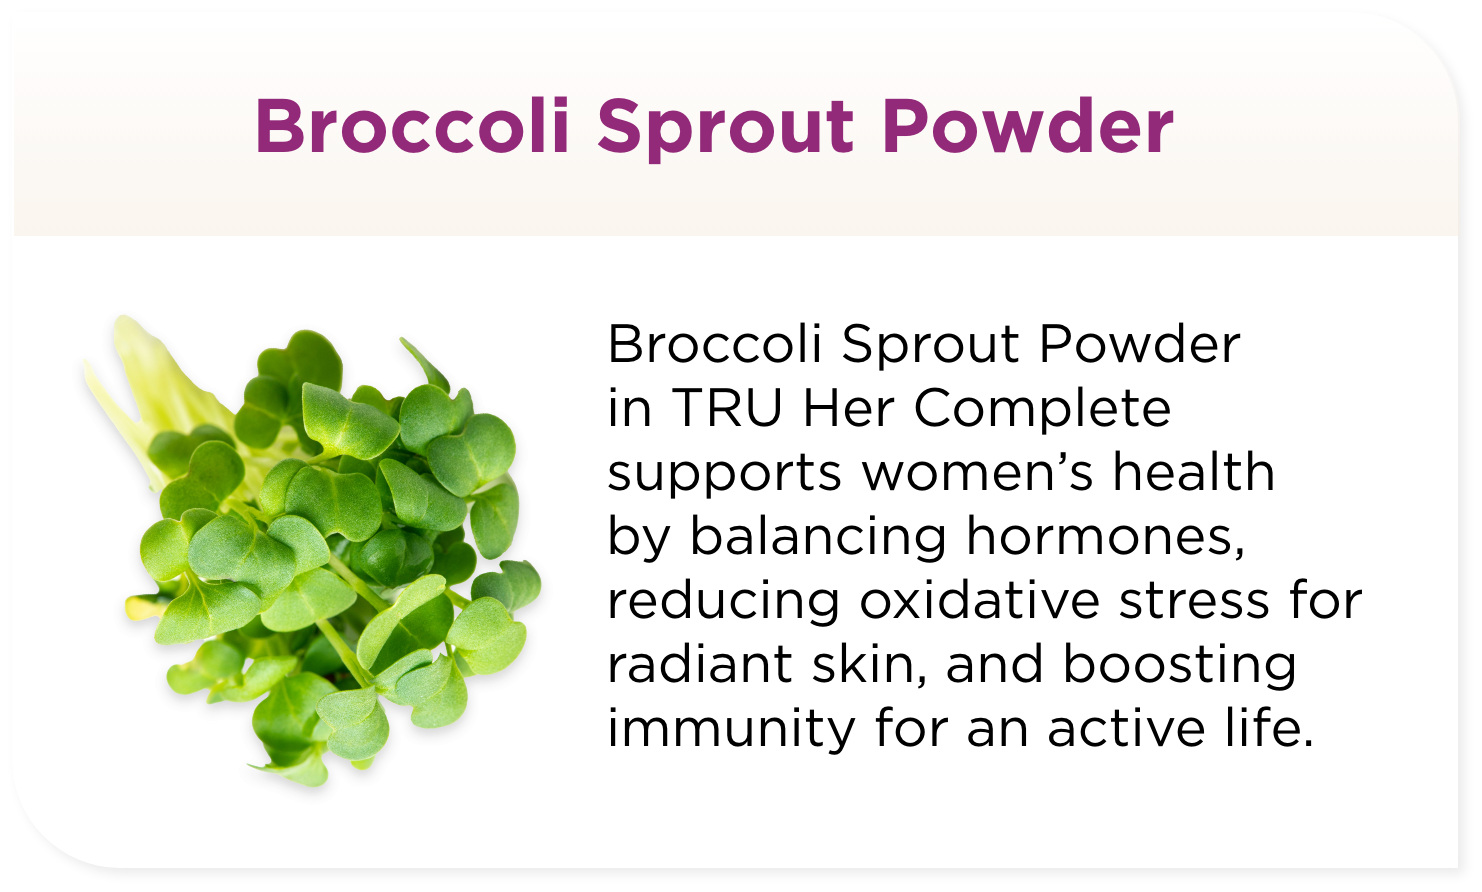  Broccoli Sprout Powder in TRU Her Complete supports women’s health by balancing hormones, reducing oxidative stress for radiant skin, and boosting immunity for an active life.